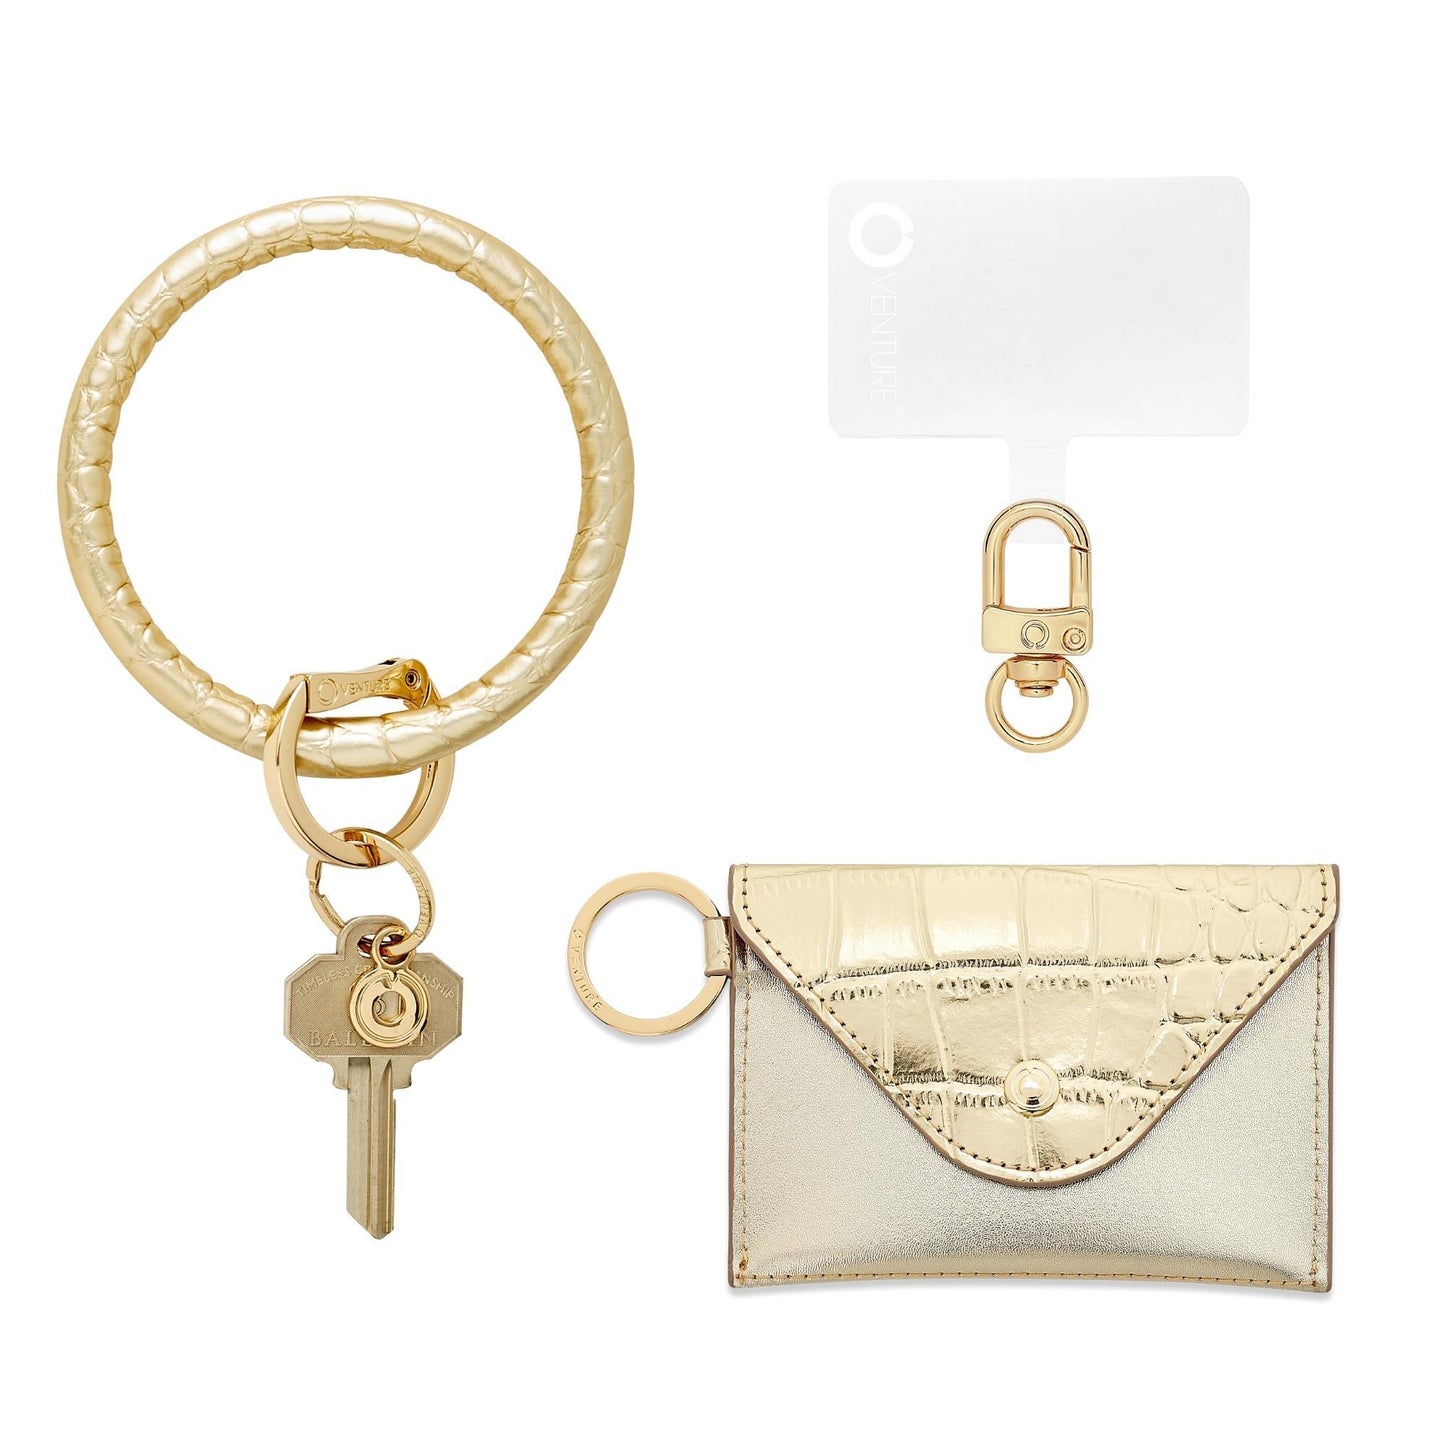 Luxe gold wallet wristlet with phone holder.